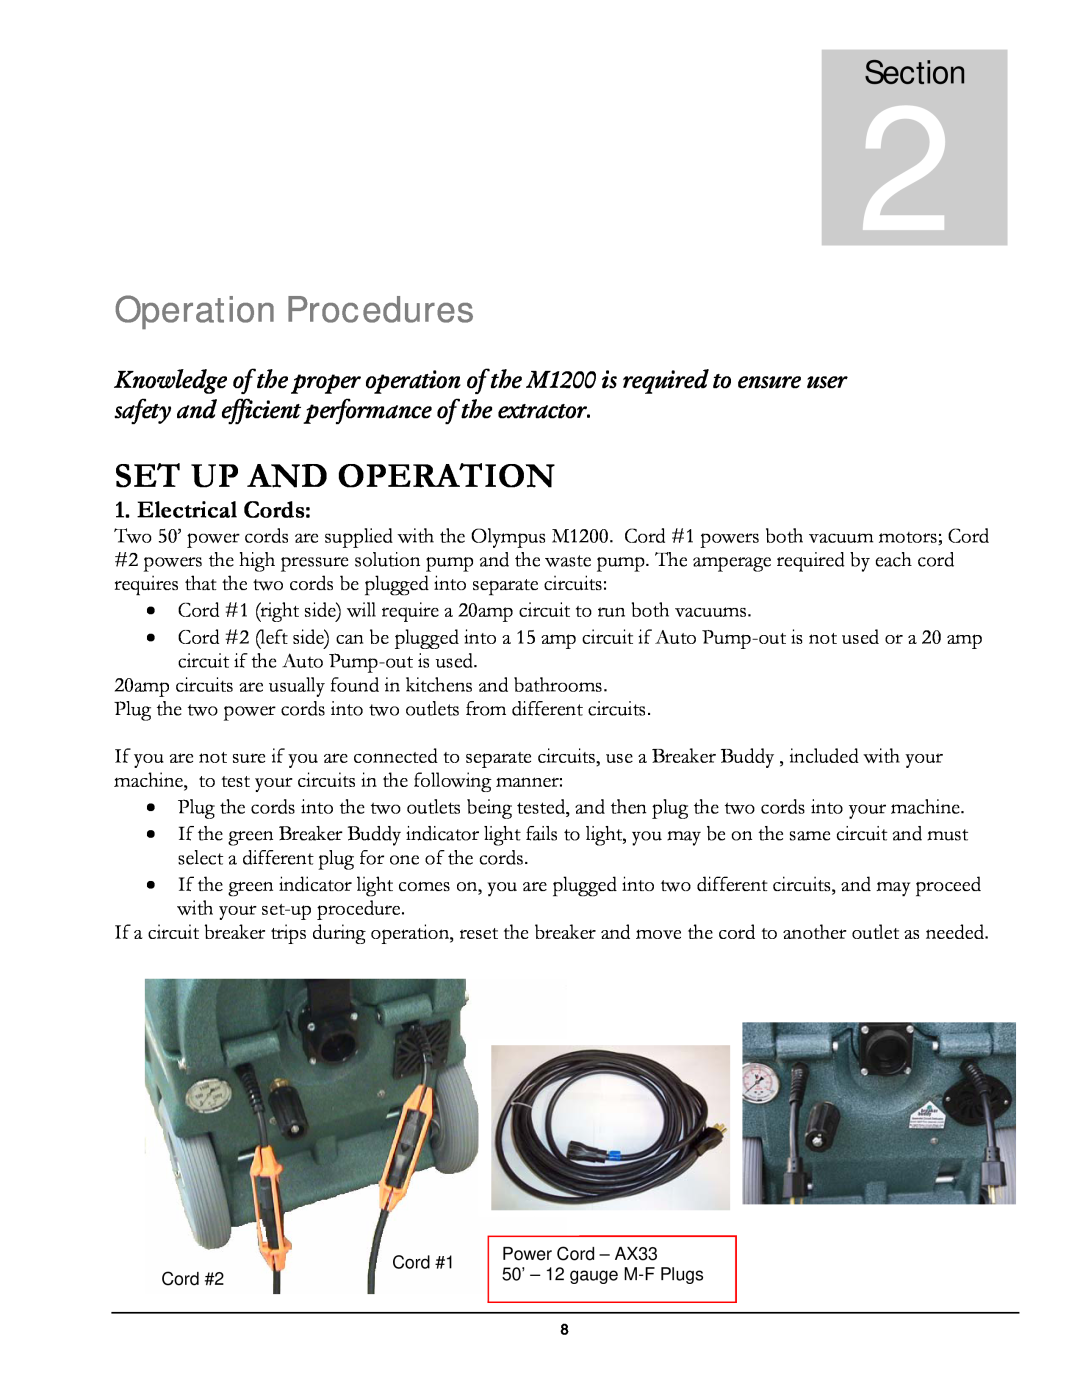 Olympus M1200 manual Operation Procedures, Set Up And Operation, 2Section, Electrical Cords 